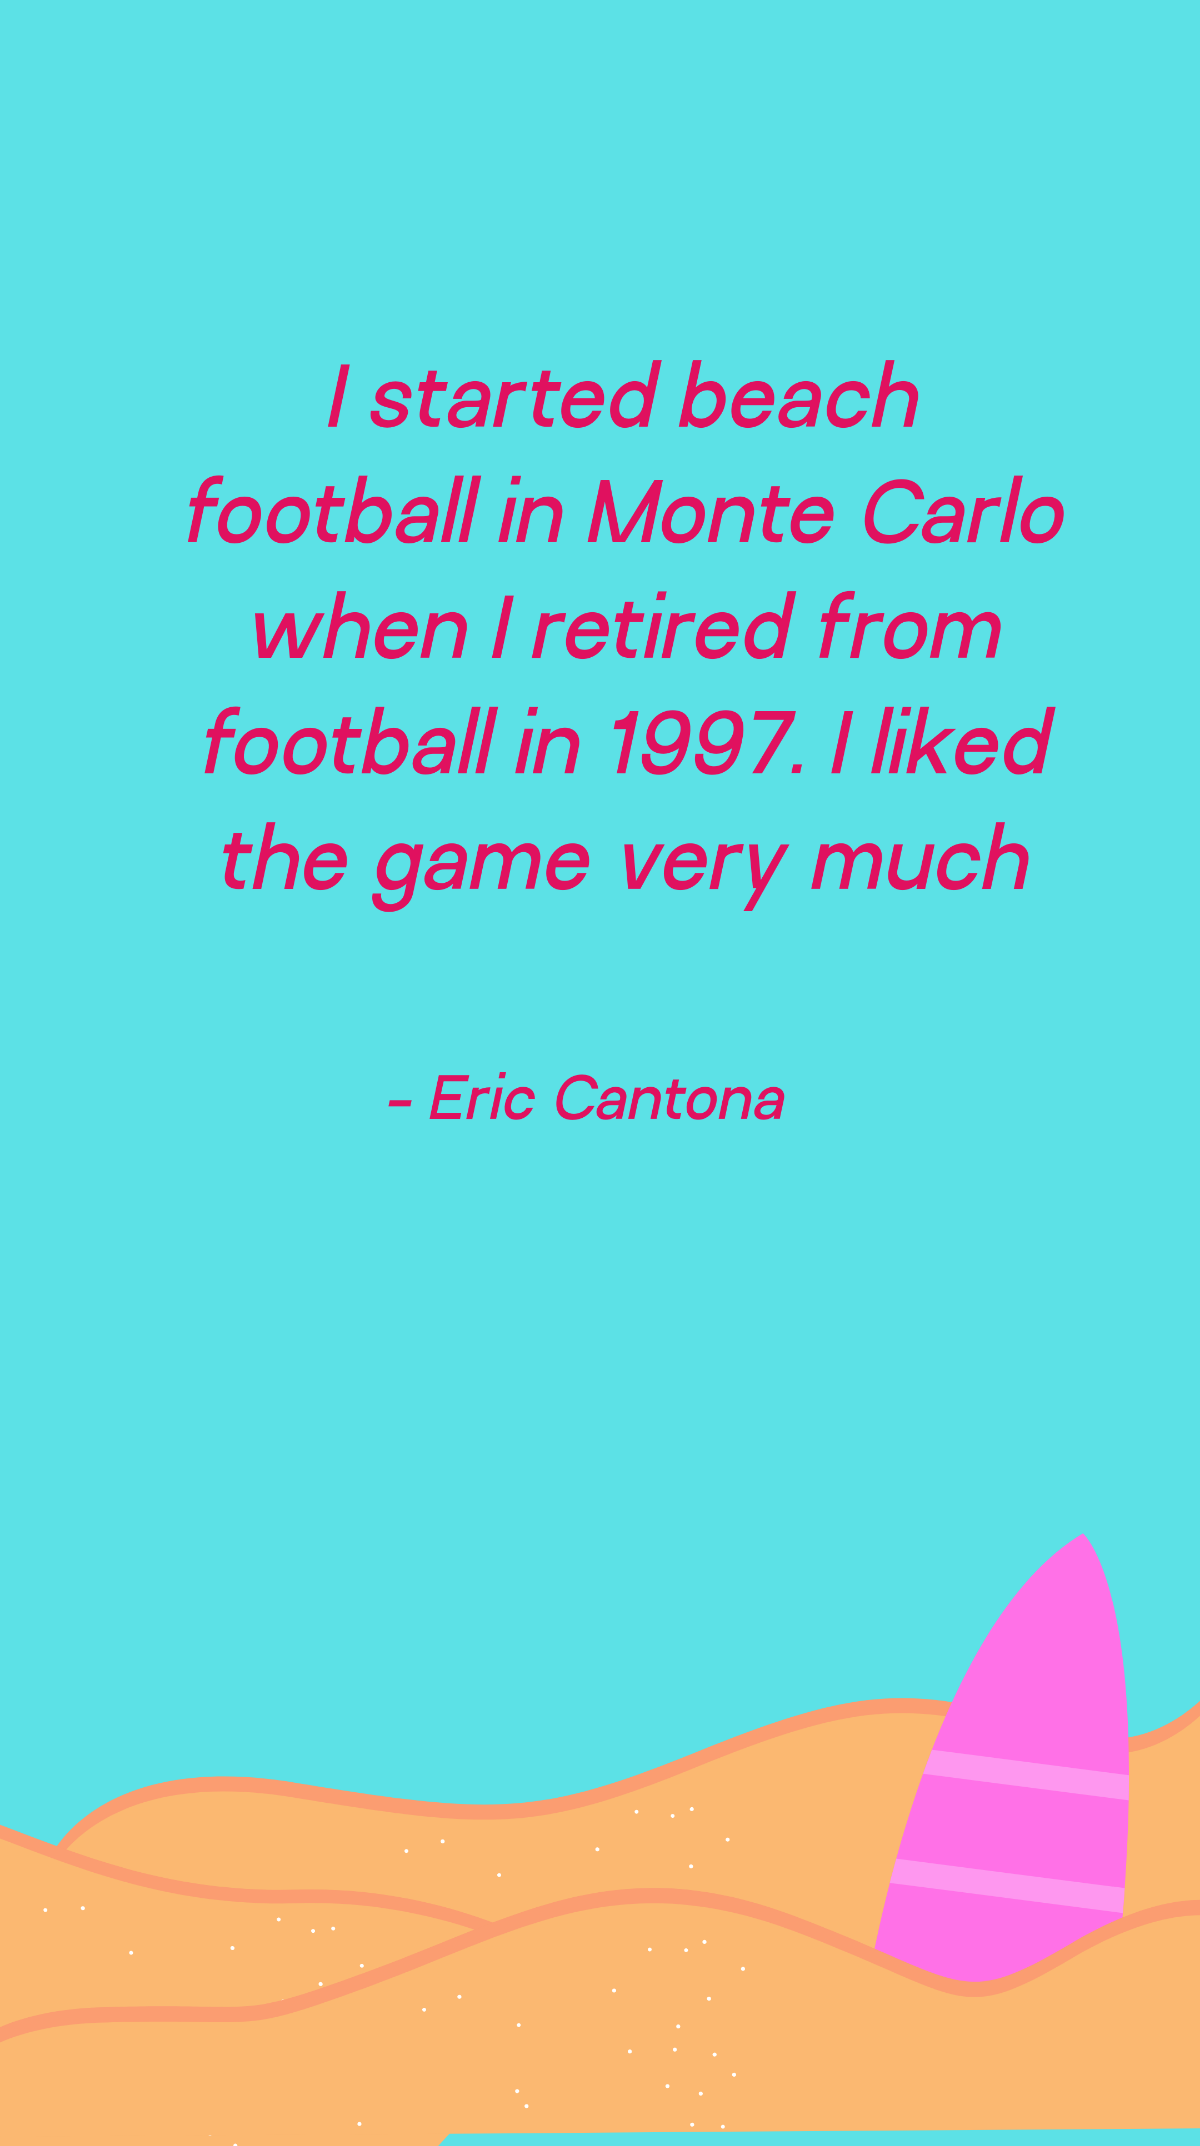 Eric Cantona - I started beach football in Monte Carlo when I retired from football in 1997. I liked the game very much Template